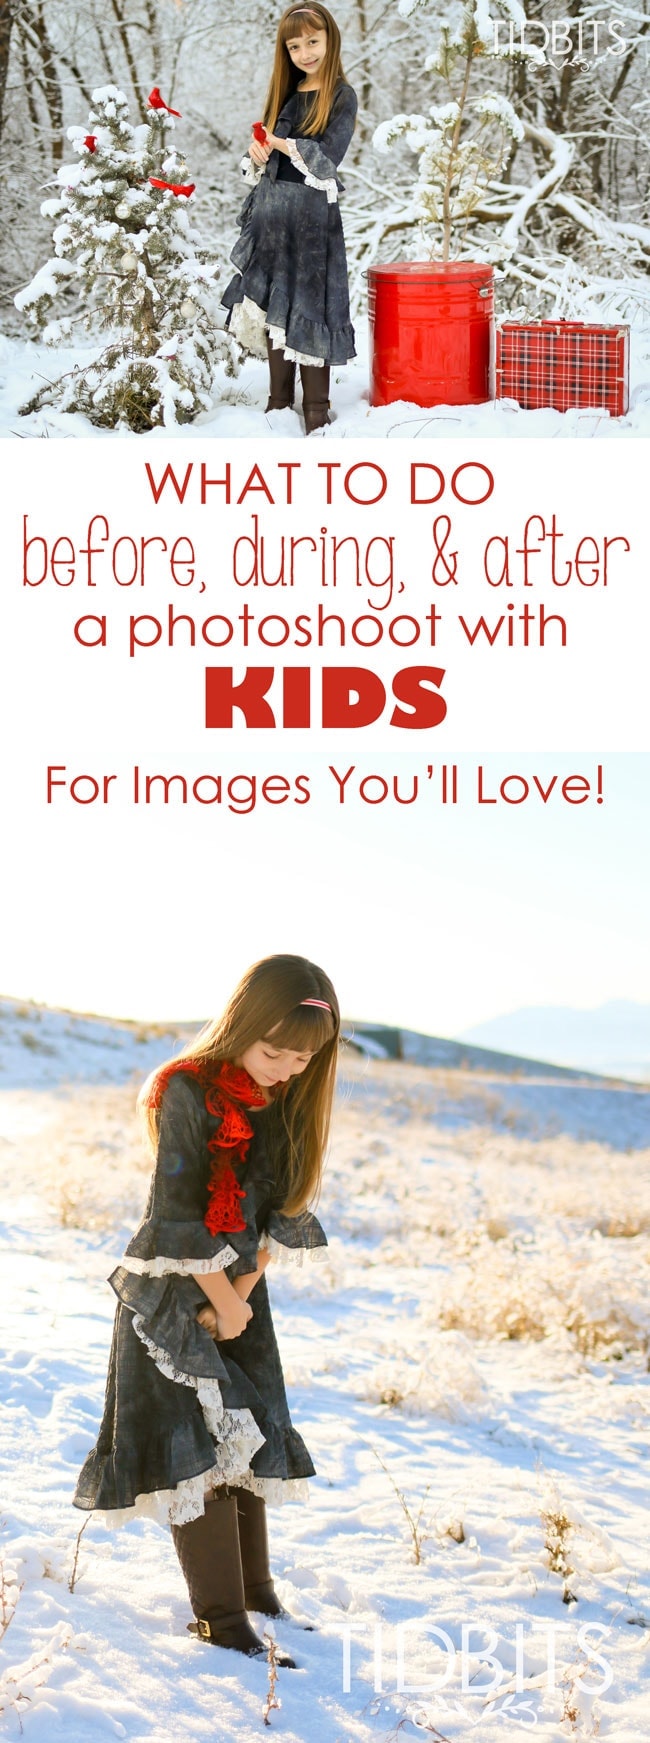 What to do before, during and after a photoshoot with kids - for images you'll love and an experience you will treasure.